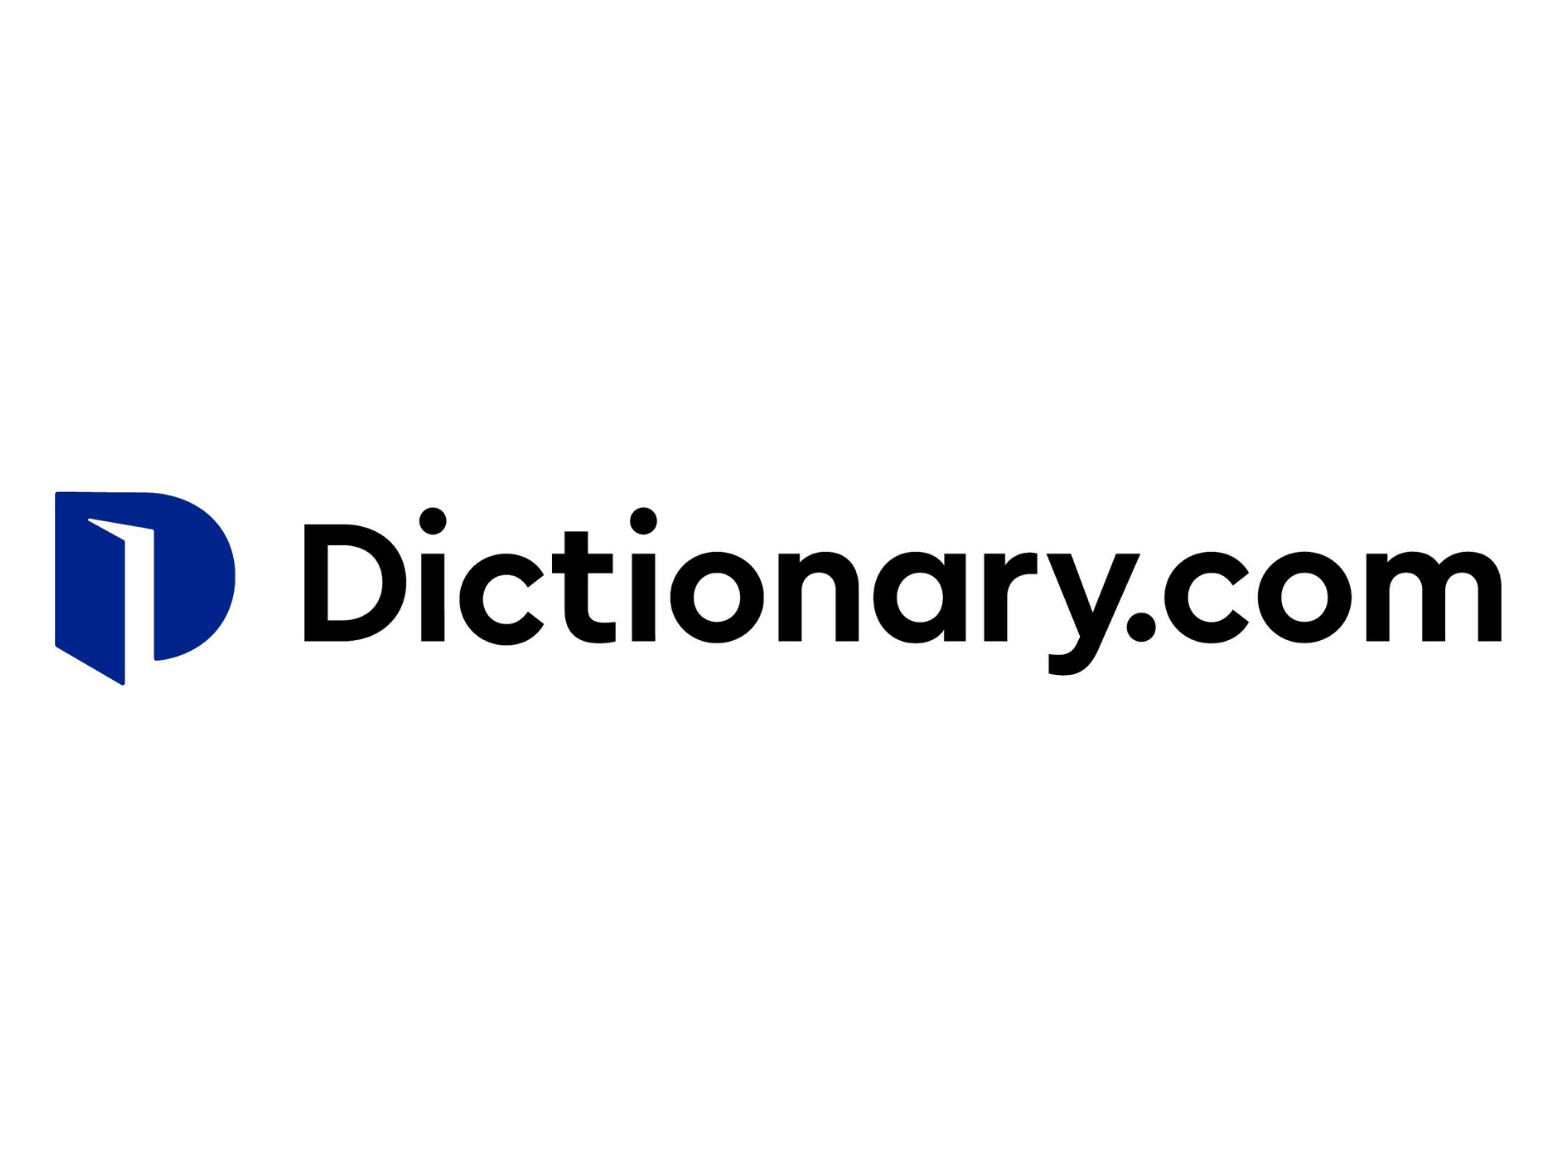 Dictionary.com Adds More Than 300 New Words